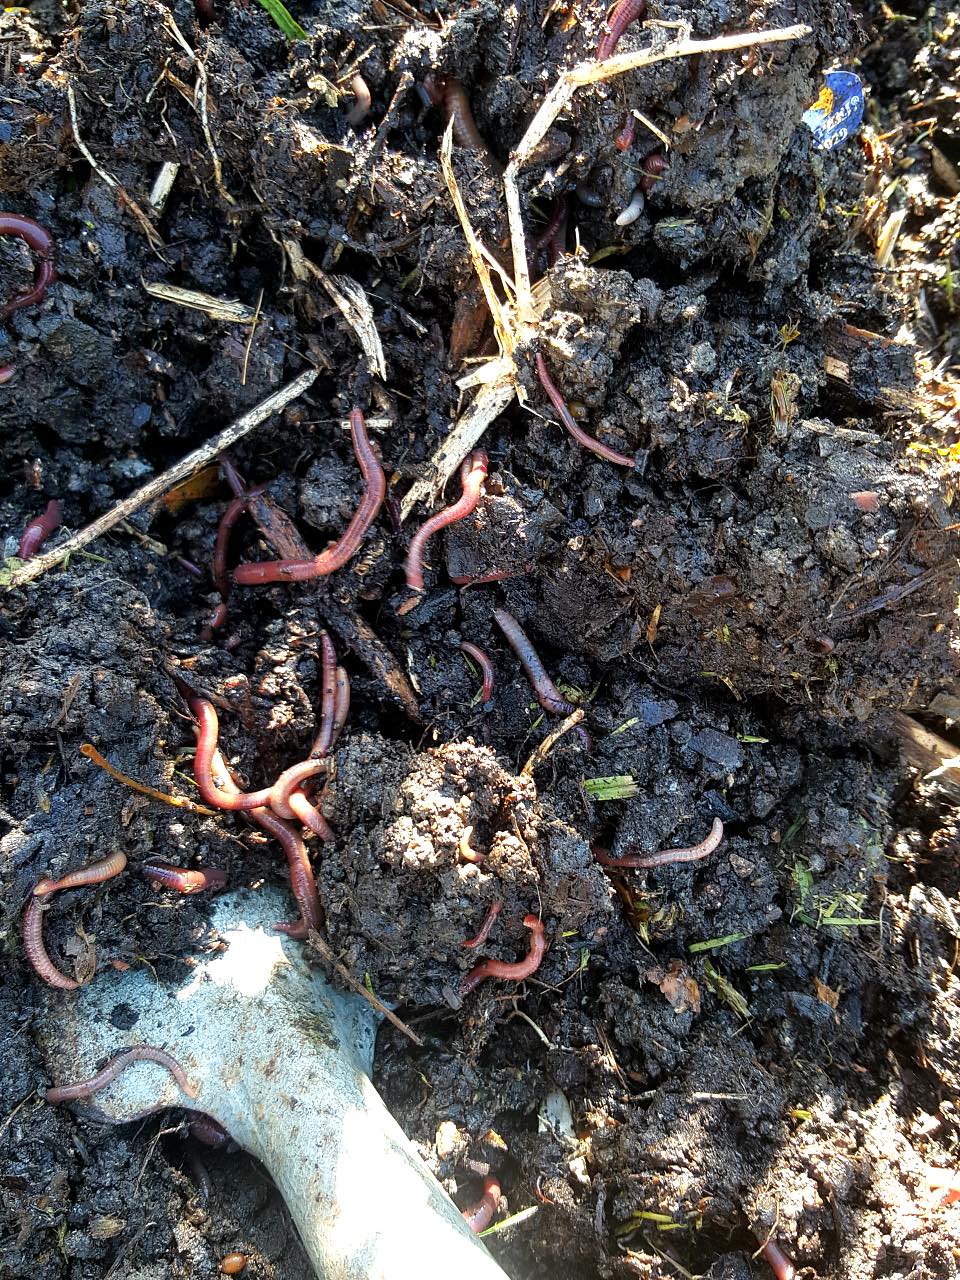 Worms doing good.